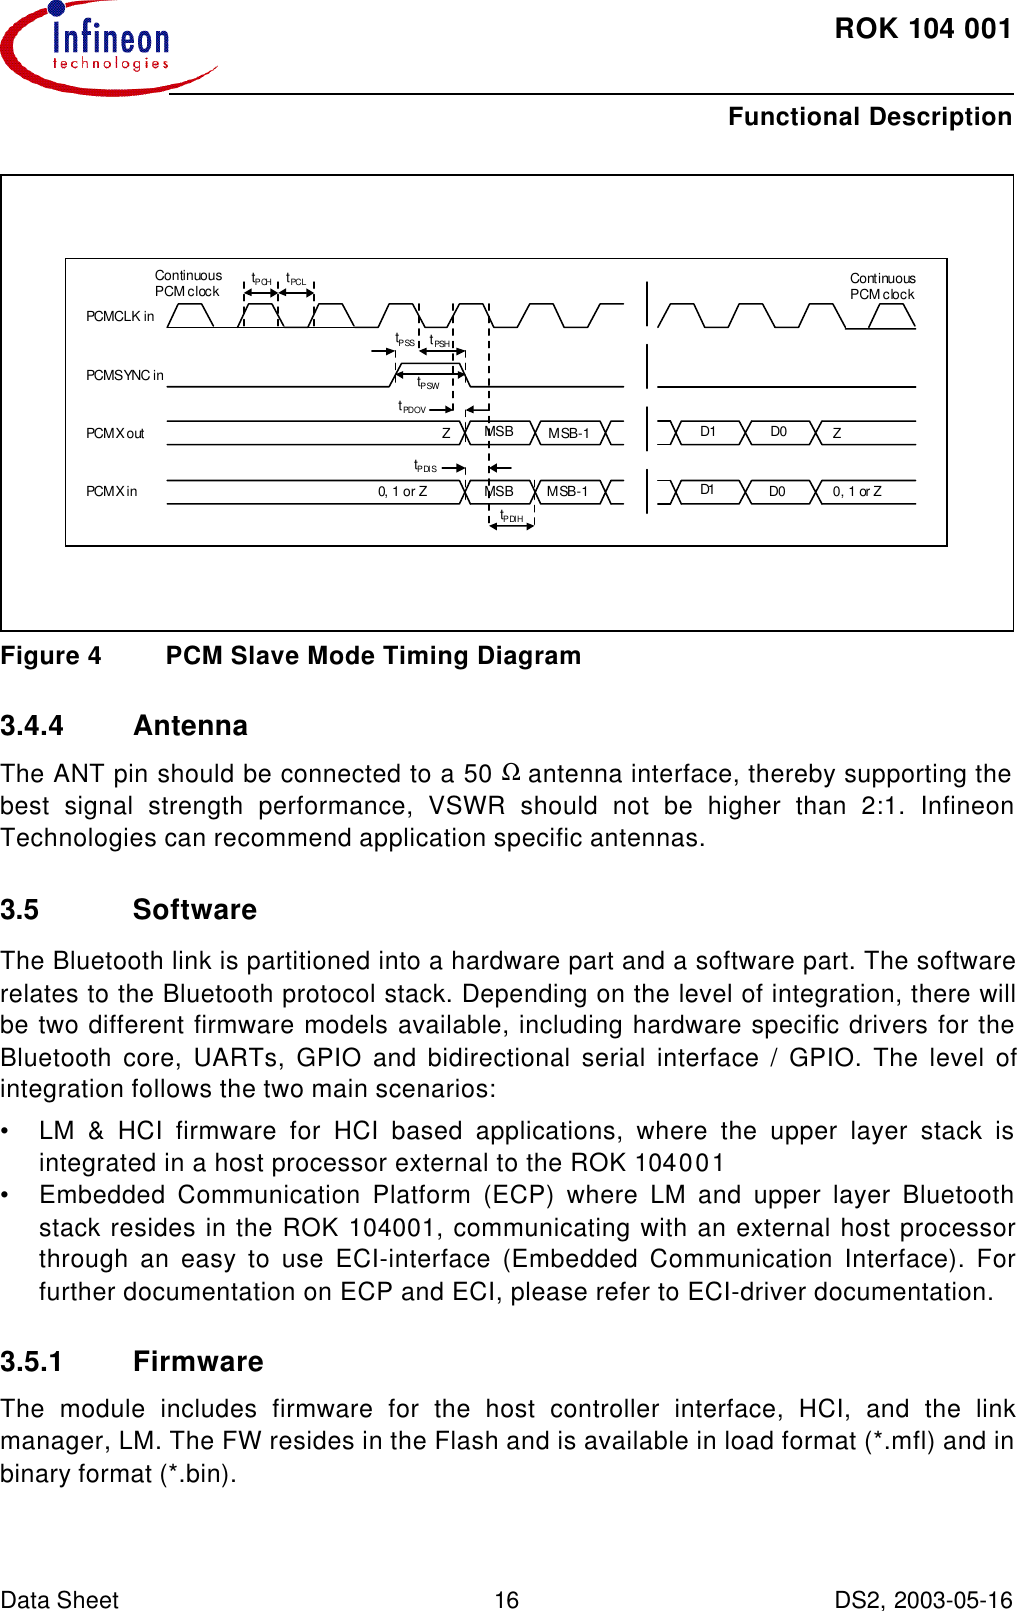 ROK104001Functional DescriptionData Sheet 16 DS2, 2003-05-16   Figure4 PCM Slave Mode Timing Diagram3.4.4 AntennaThe ANT pin should be connected to a 50 Ω antenna interface, thereby supporting thebest signal strength performance, VSWR should not be higher than 2:1. InfineonTechnologies can recommend application specific antennas.3.5 SoftwareThe Bluetooth link is partitioned into a hardware part and a software part. The softwarerelates to the Bluetooth protocol stack. Depending on the level of integration, there willbe two different firmware models available, including hardware specific drivers for theBluetooth core, UARTs, GPIO and bidirectional serial interface / GPIO. The level ofintegration follows the two main scenarios:•LM &amp; HCI firmware for HCI based applications, where the upper layer stack isintegrated in a host processor external to the ROK104001•Embedded Communication Platform (ECP) where LM and upper layer Bluetoothstack resides in the ROK 104001, communicating with an external host processorthrough an easy to use ECI-interface (Embedded Communication Interface). Forfurther documentation on ECP and ECI, please refer to ECI-driver documentation.3.5.1 FirmwareThe module includes firmware for the host controller interface, HCI, and the linkmanager, LM. The FW resides in the Flash and is available in load format (*.mfl) and inbinary format (*.bin). 0,1 orZZ Z0,1 orZtPCHContinuousPCMclocktPSWtPSSContinuousPCMclockPCMSYNC inPCMCLKinPCMXinPCMXouttPDIHtPDIStPDOVtPSHtPCLMSB MSB-1D1D0D1D0MSB MSB-1